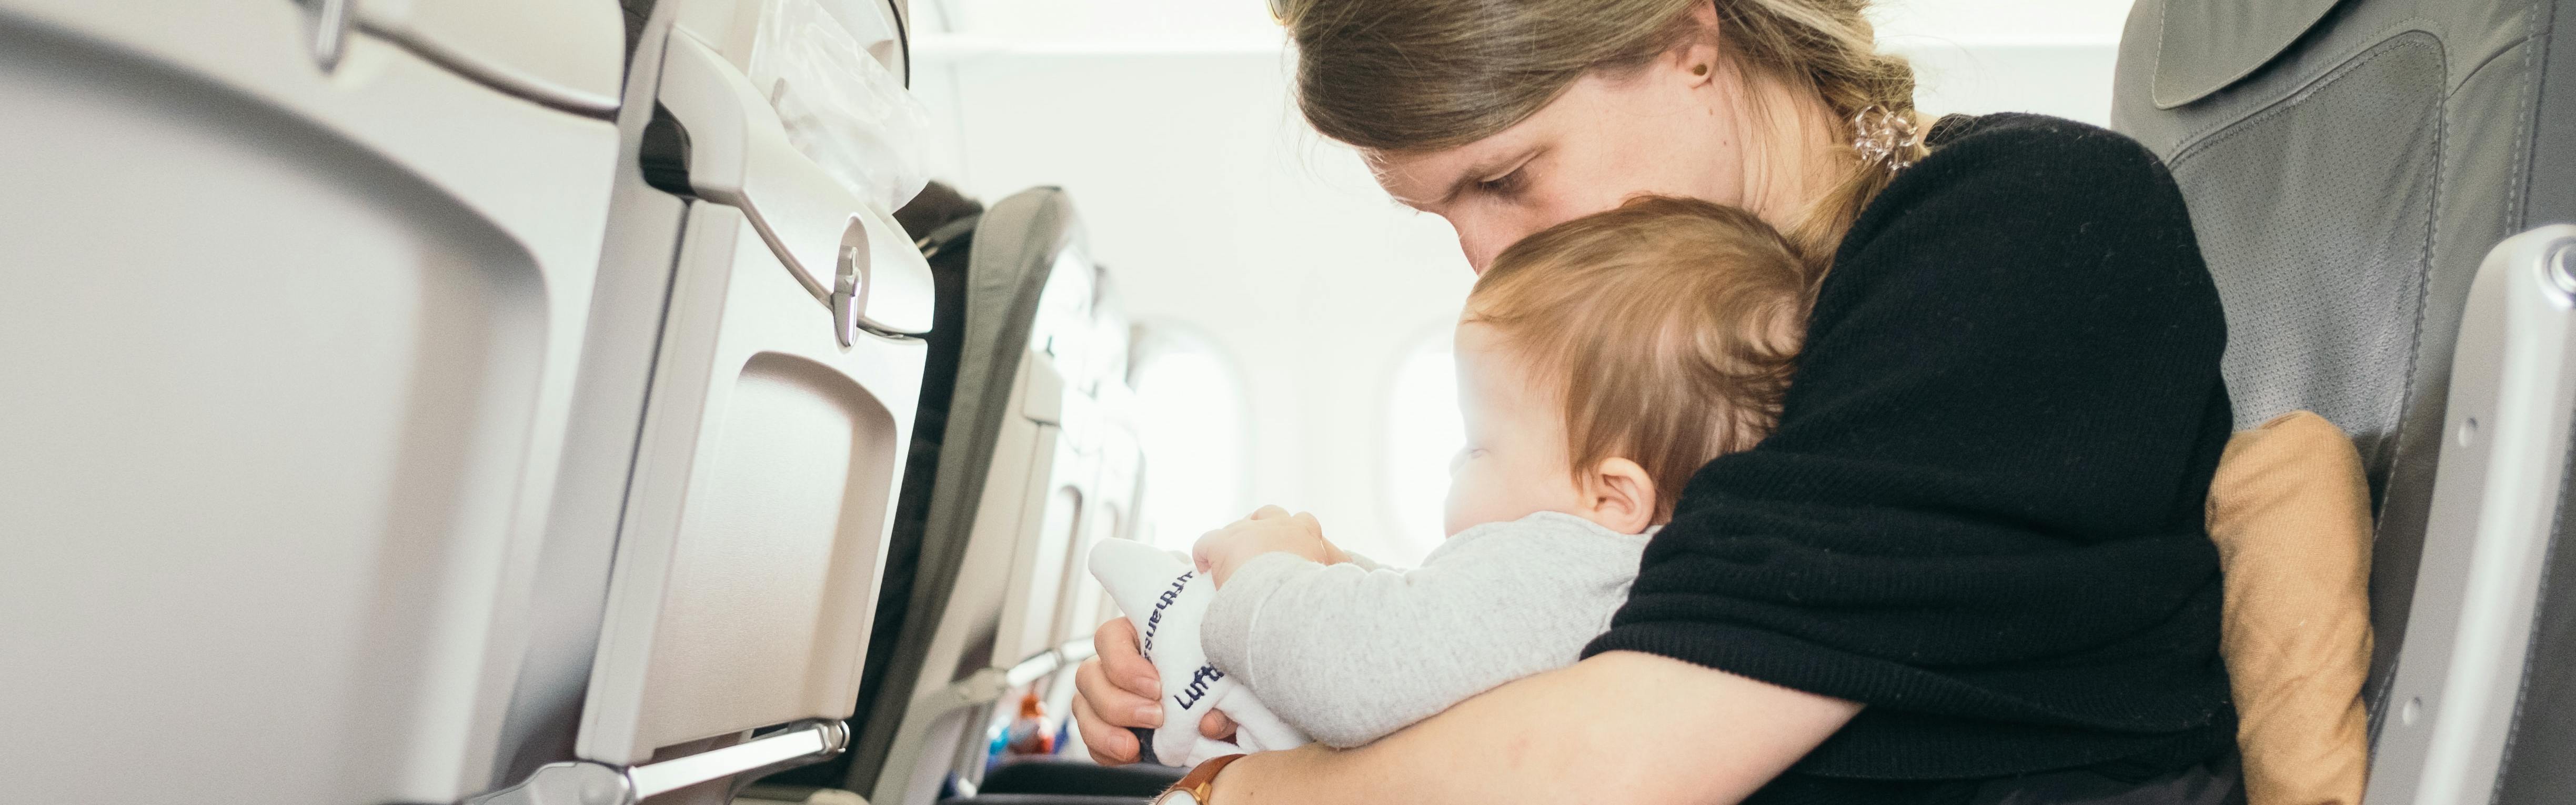 A baby and a mom sitting in seats on an airplane.